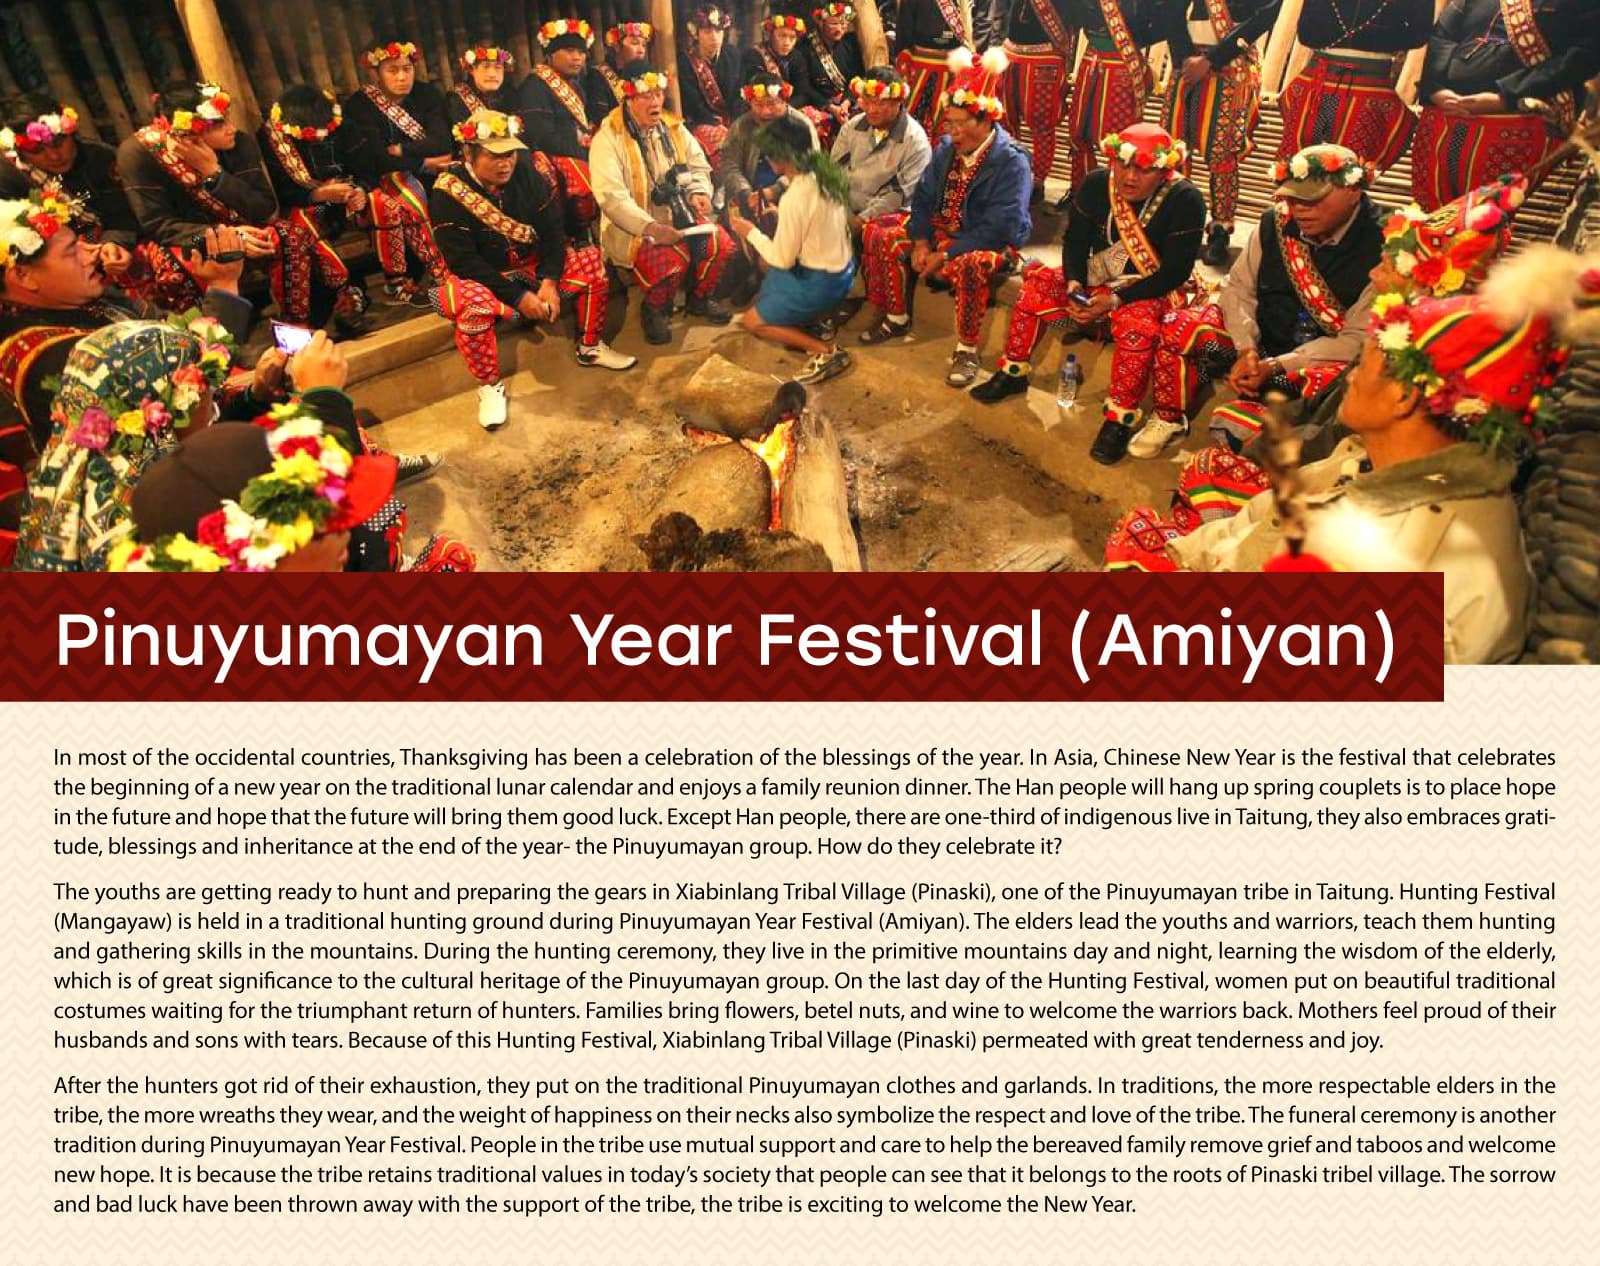 Pinuyumayan Year Festival (Amiyan)
In most of the occidental countries, Thanksgiving has been a celebration of the blessings of the year. In Asia, Chinese New Year is the festival that celebrates the beginning of a new year on the traditional lunar calendar and enjoys a family reunion dinner. The Han people will hang up spring couplets is to place hope in the future and hope that the future will bring them good luck. Except Han people, there are one-third of indigenous live in Taitung, they also embraces gratitude, blessings and inheritance at the end of the year- the Pinuyumayan group. How do they celebrate it?
The youths are getting ready to hunt and preparing the gears in Xiabinlang Tribal Village (Pinaski), one of the Pinuyumayan tribe in Taitung. Hunting Festival (Mangayaw) is held in a traditional hunting ground during Pinuyumayan Year Festival (Amiyan). The elders lead the youths and warriors, teach them hunting and gathering skills in the mountains. During the hunting ceremony, they live in the primitive mountains day and night, learning the wisdom of the elderly, which is of great significance to the cultural heritage of the Pinuyumayan group. On the last day of the Hunting Festival, women put on beautiful traditional costumes waiting for the triumphant return of hunters. Families bring flowers, betel nuts, and wine to welcome the warriors back. Mothers feel proud of their husbands and sons with tears. Because of this Hunting Festival, Xiabinlang Tribal Village (Pinaski) permeated with great tenderness and joy.    
After the hunters got rid of their exhaustion, they put on the traditional Pinuyumayan clothes and garlands. In traditions, the more respectable elders in the tribe, the more wreaths they wear, and the weight of happiness on their necks also symbolize the respect and love of the tribe. The funeral ceremony is another tradition during Pinuyumayan Year Festival. People in the tribe use mutual support and care to help the bereaved family remove grief and taboos and welcome new hope. It is because the tribe retains traditional values in today’s society that people can see that it belongs to the roots of Pinaski tribel village. The sorrow and bad luck have been thrown away with the support of the tribe, the tribe is exciting to welcome the New Year. 
